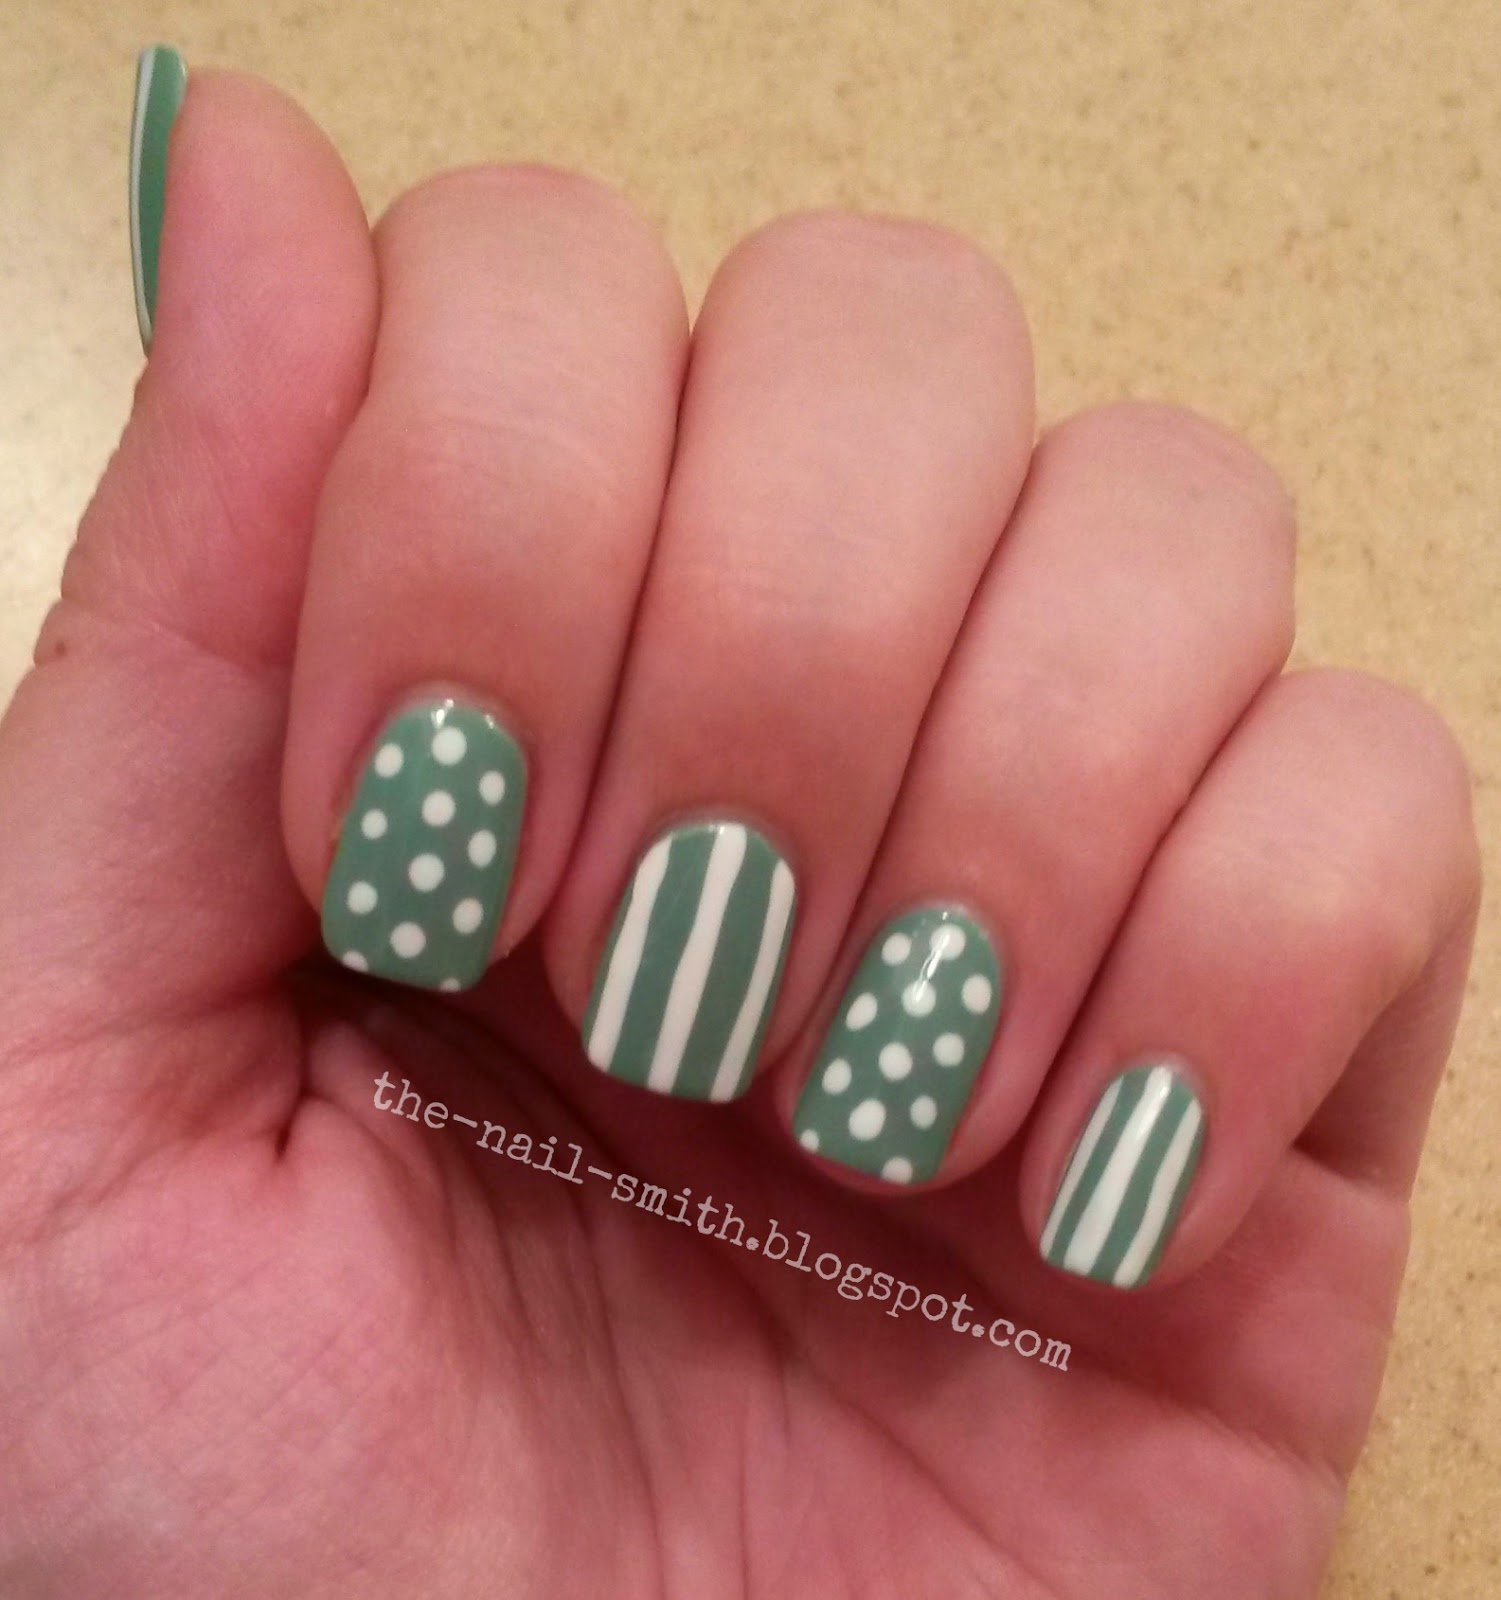 The Nail Smith: Classic Spots and Stripes